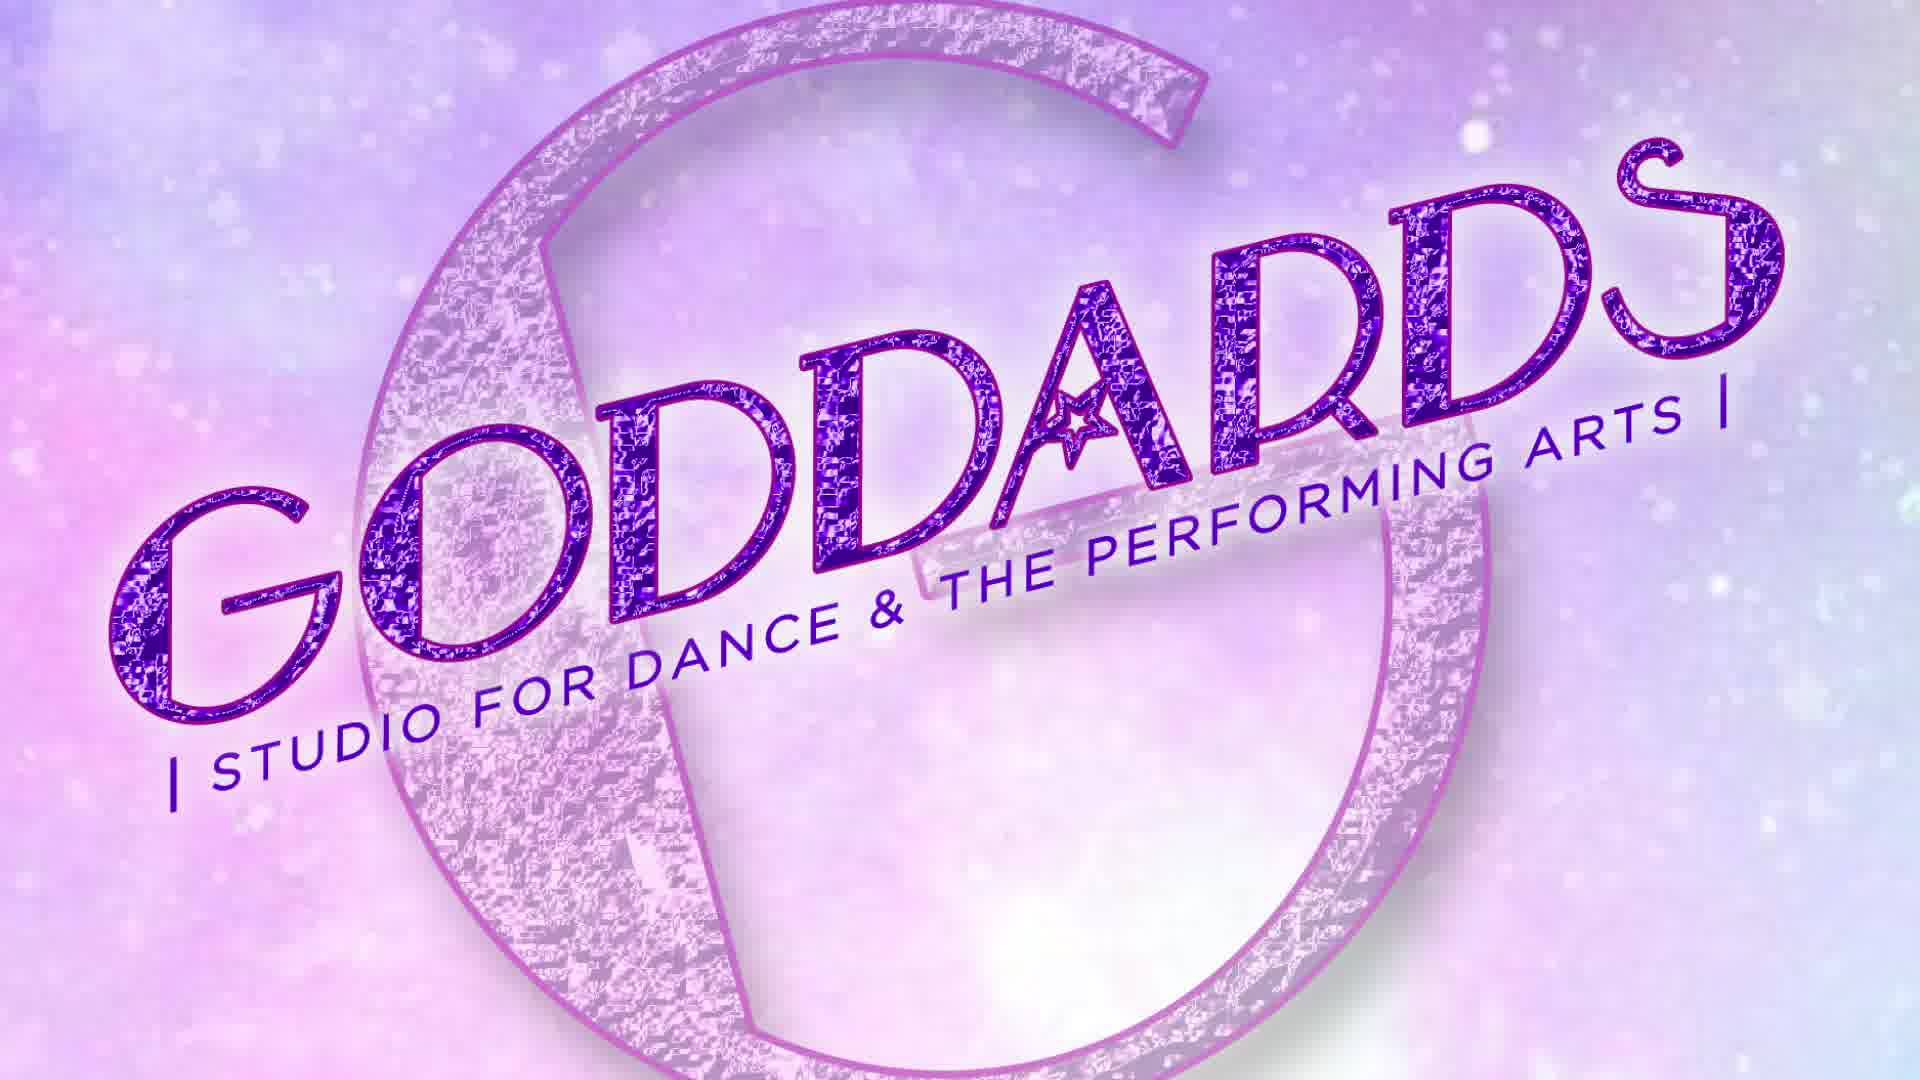 Goddards Studio for Dance and the Performing Arts Logo